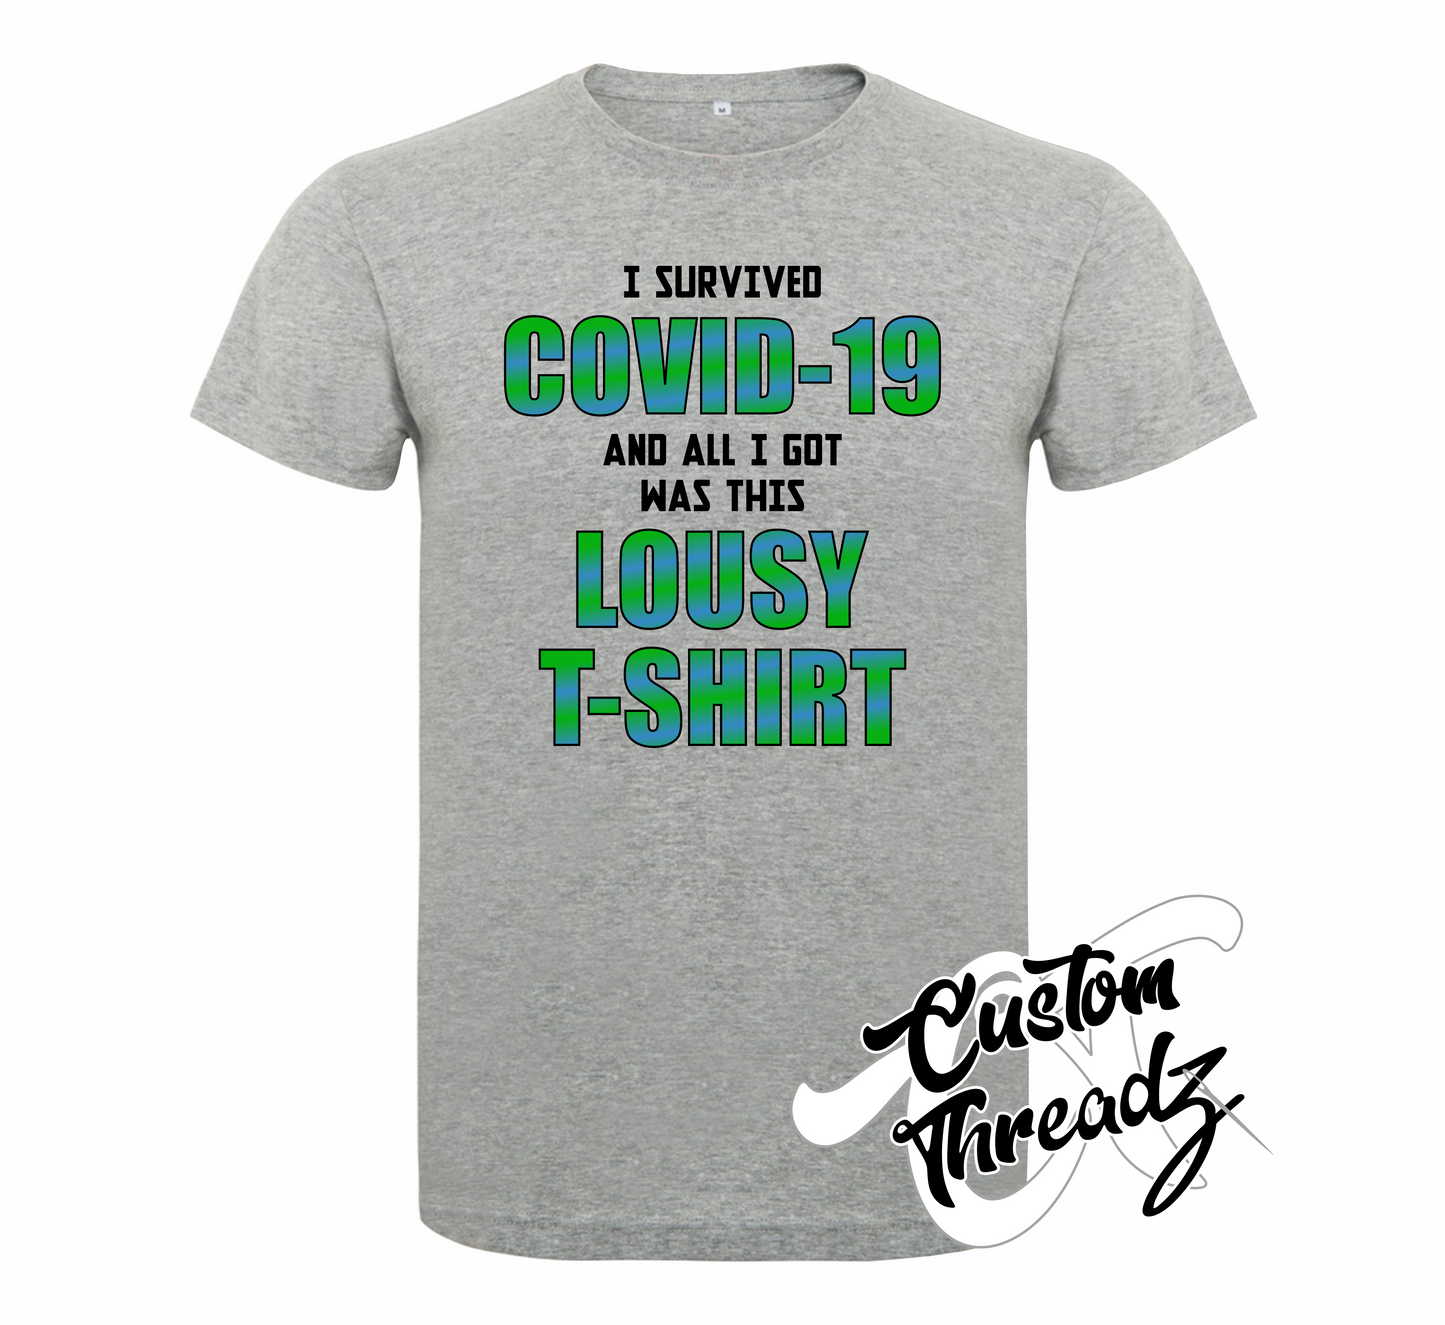 athletic heather gray tee with i survived covid and all i got was this lousy t-shirt DTG printed graphic